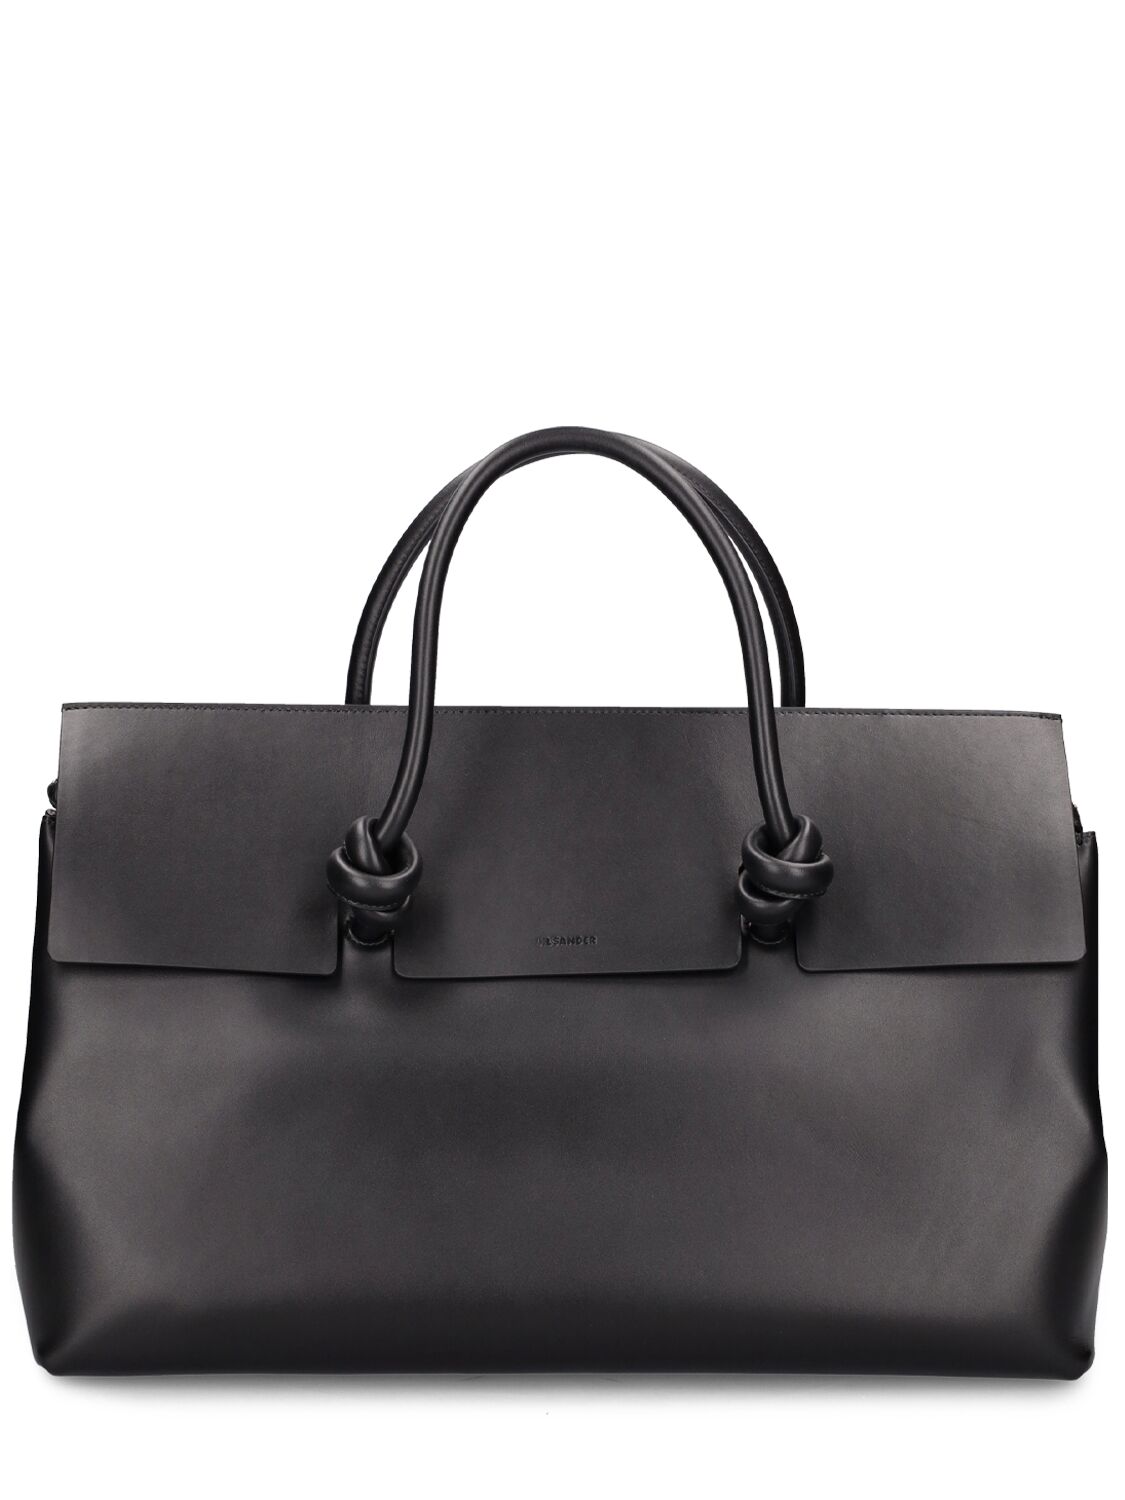 Image of Medium Knot Leather Tote Bag